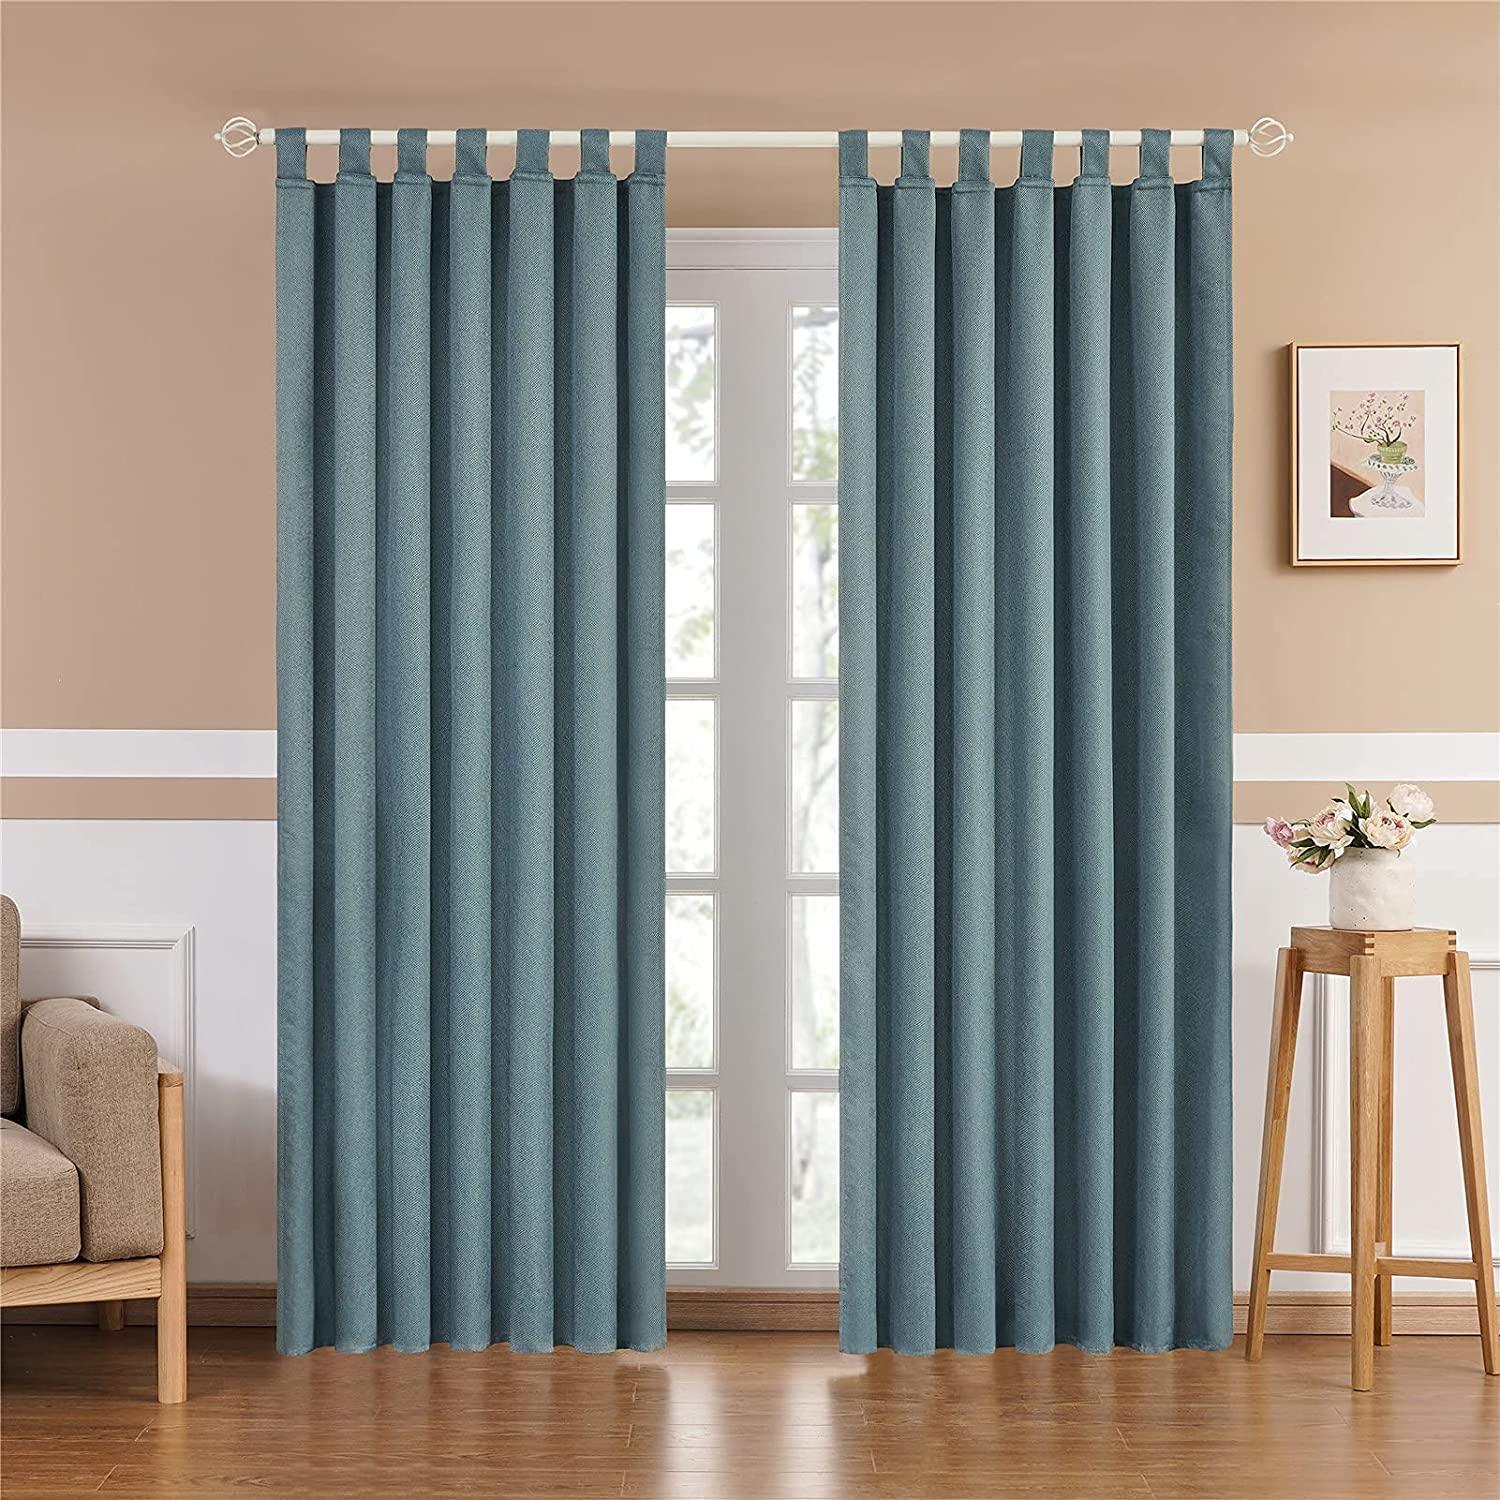 Curtainsdesign-Linen Textured Blackout Thermal Curtains Tab Top Design Privacy Protecting For Bedroom,1 Panel - Topfinel